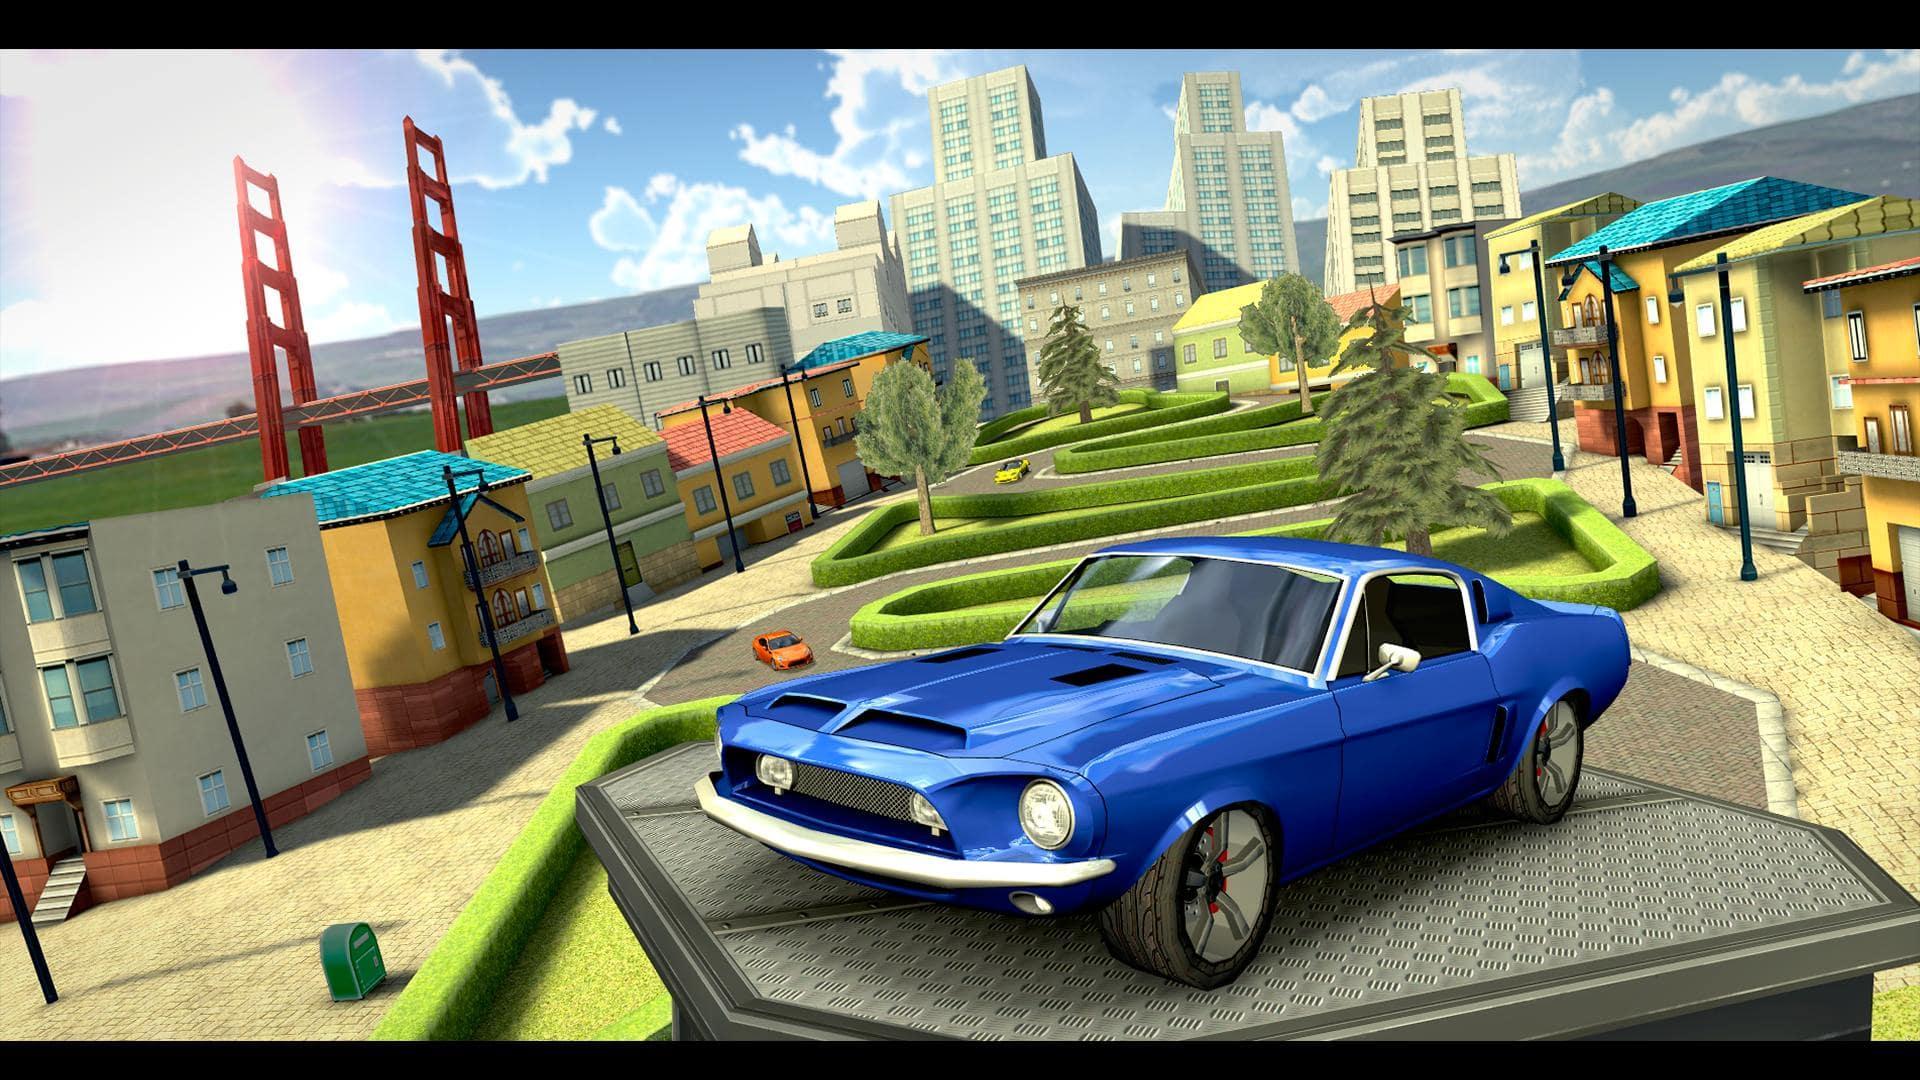 Extreme Car Parking : Car Game Game for Android - Download